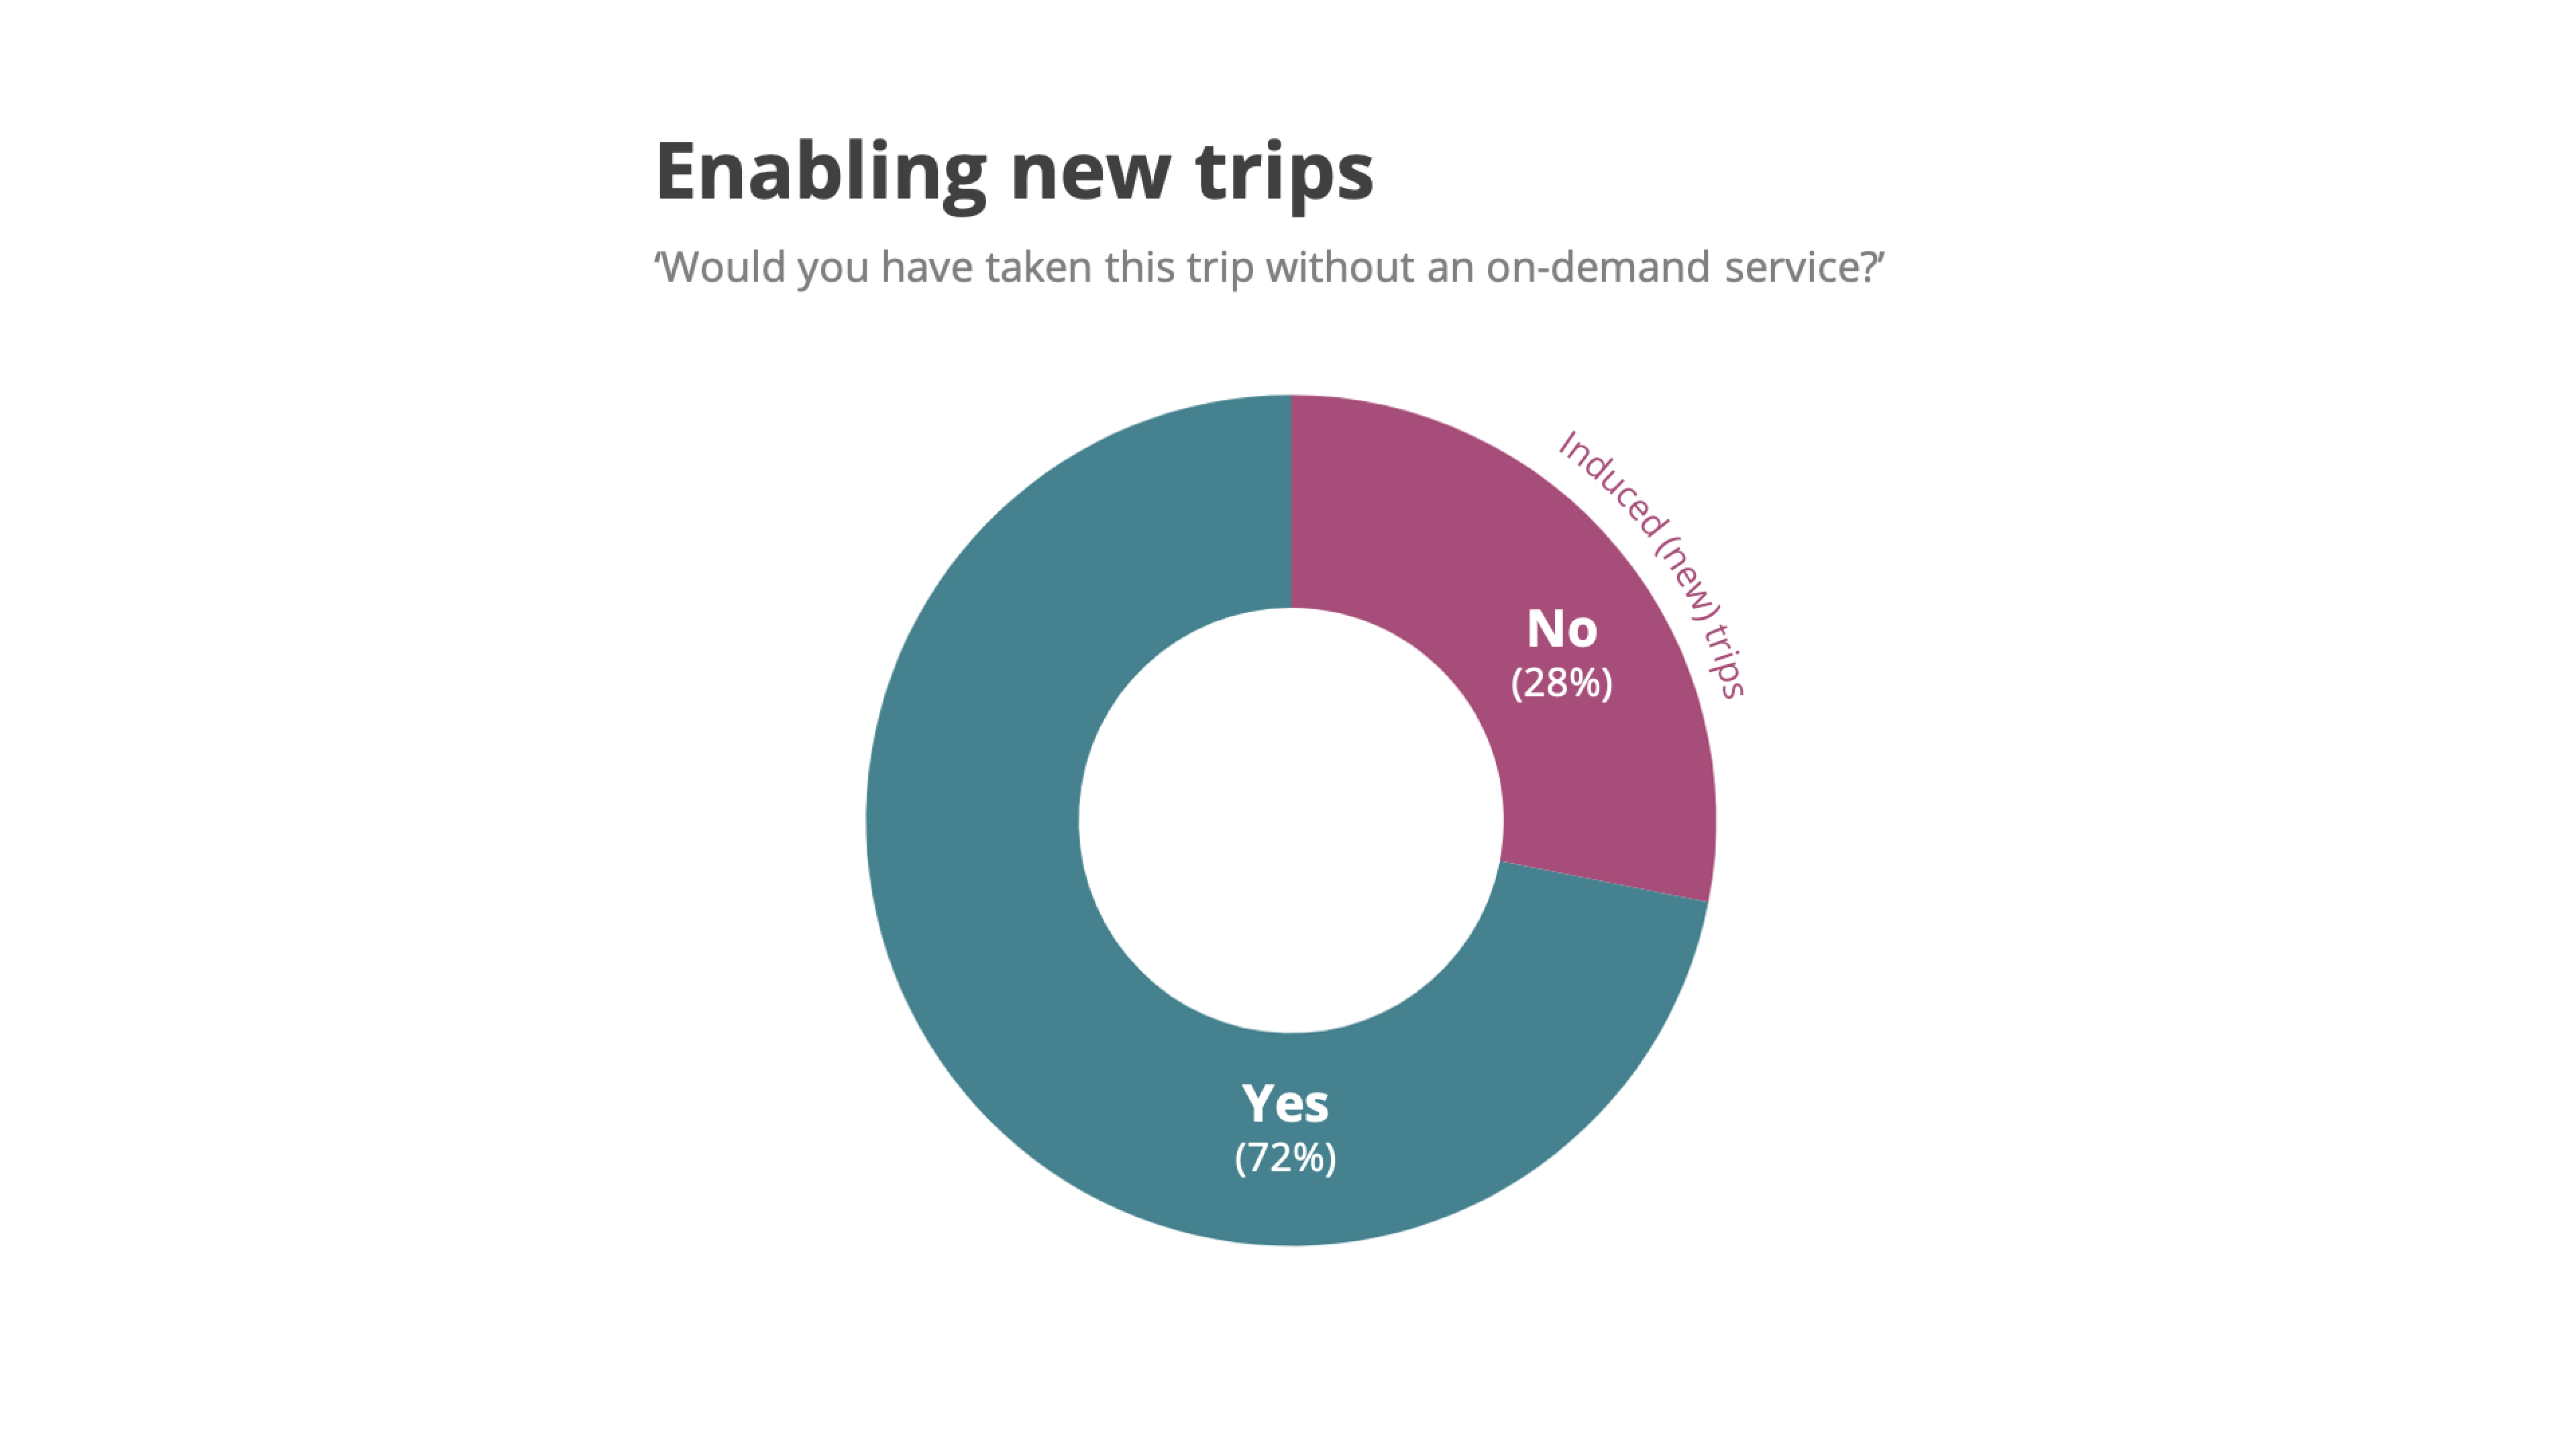 Results from microtransit rider survey